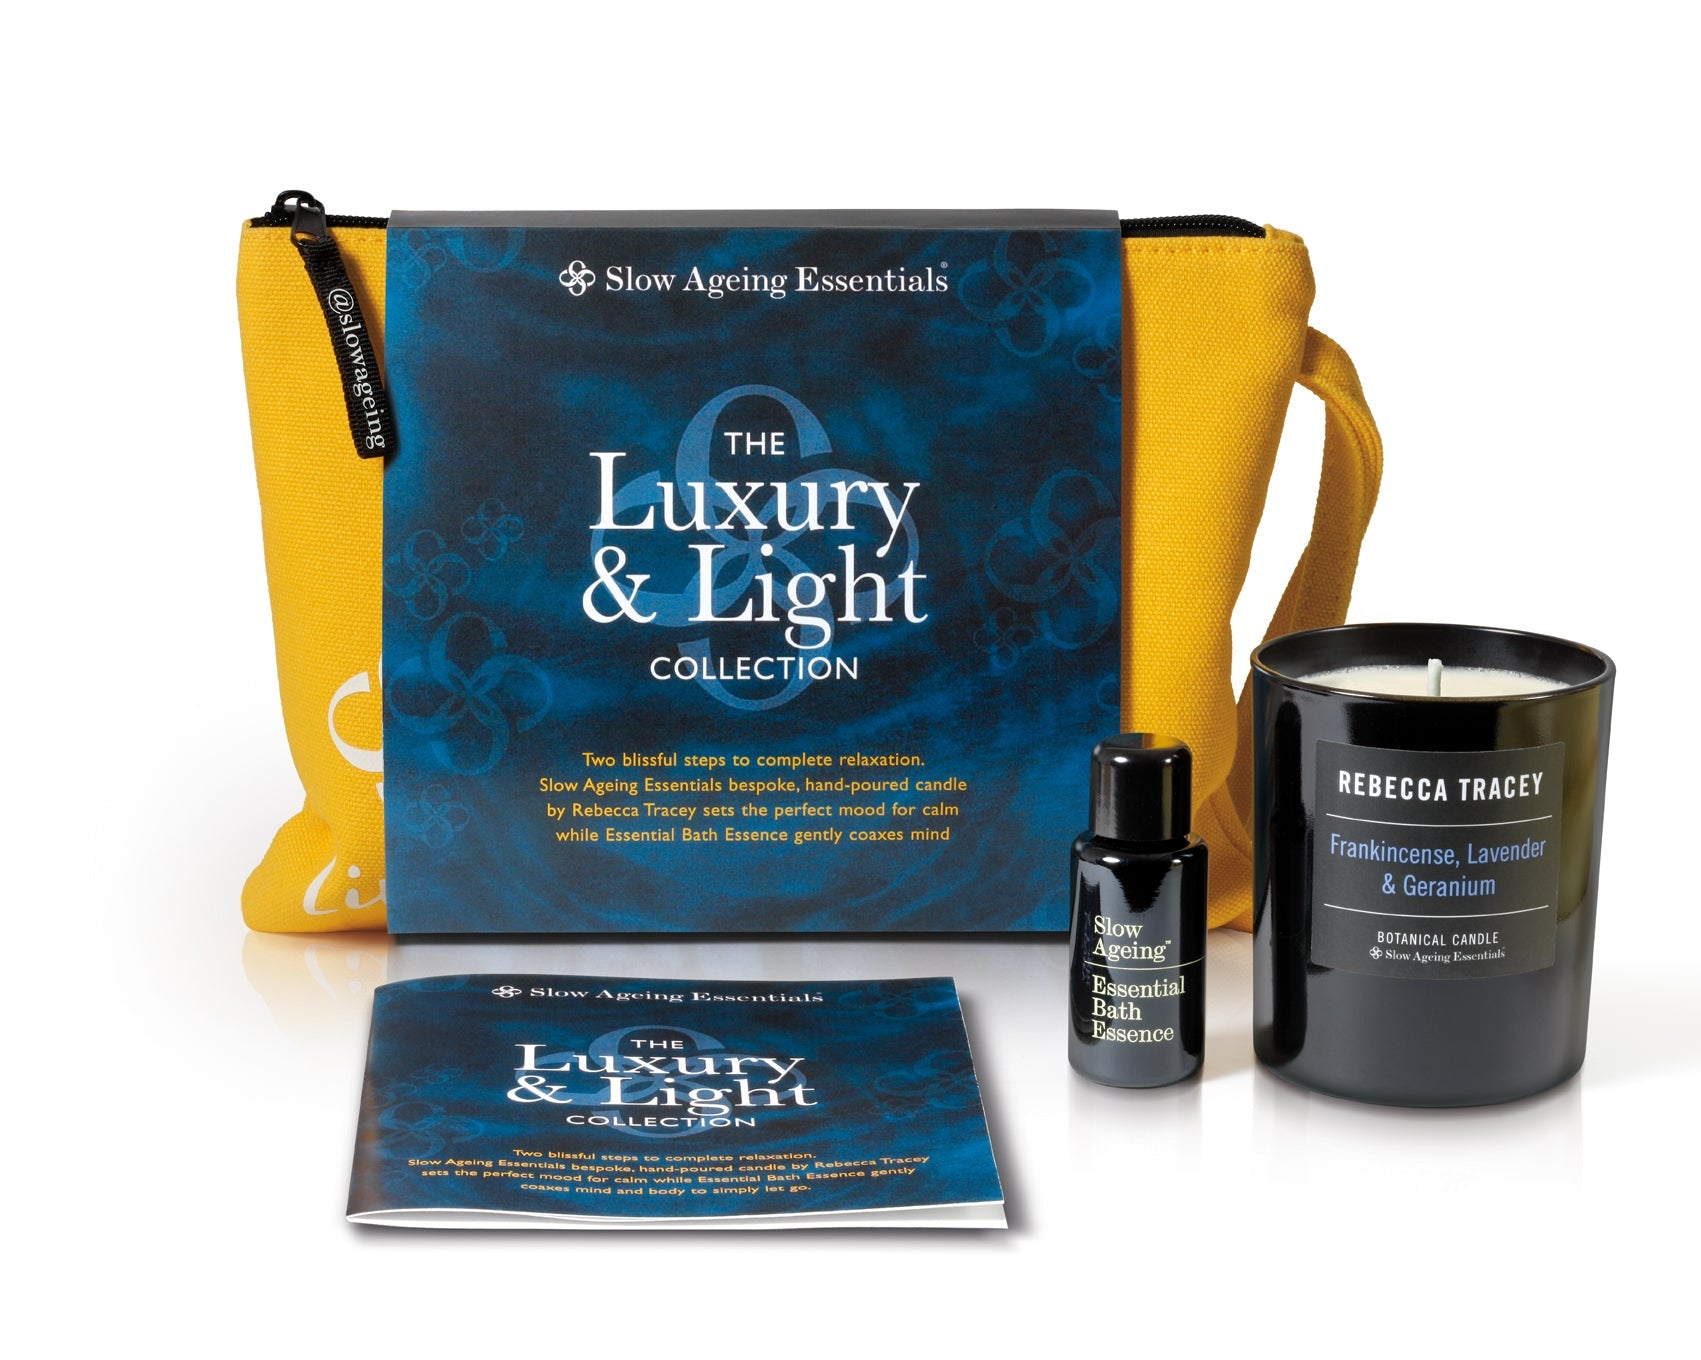 Luxury and Light Collection - Slow Ageing Essentials Skin CareSlow Ageing Essentials